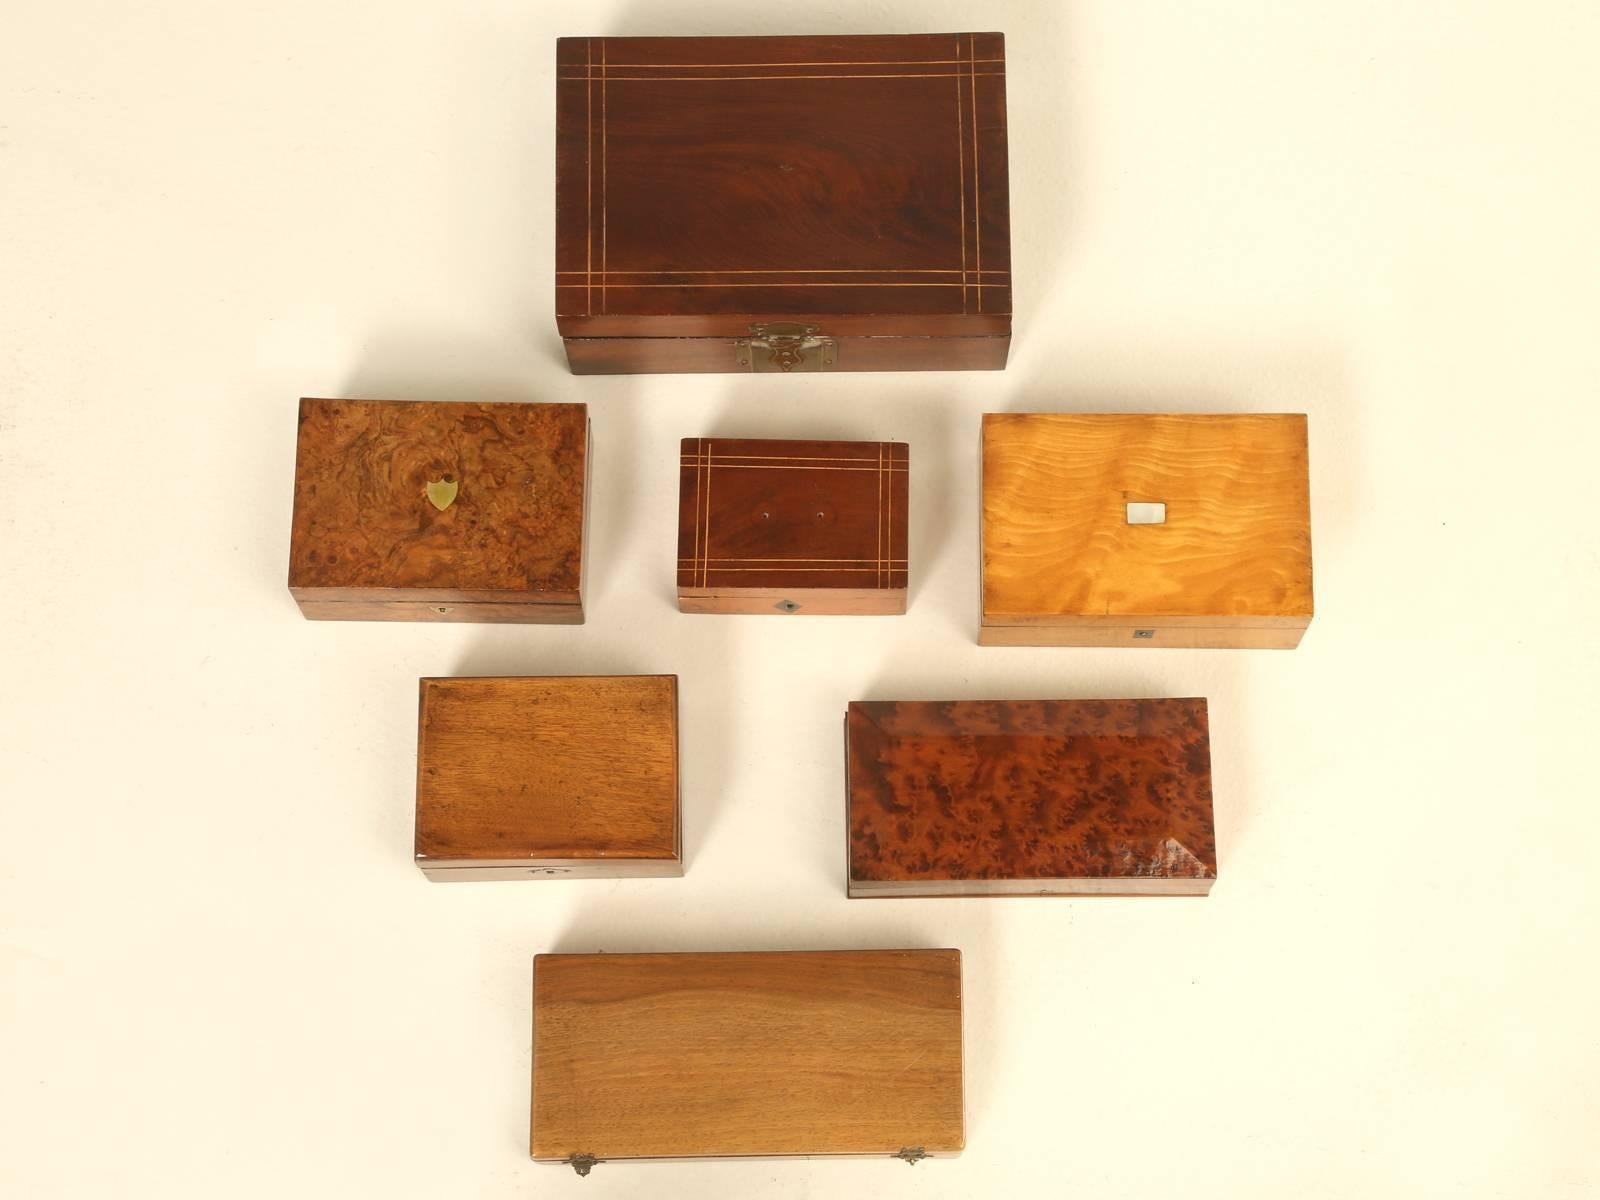 Wonderful collection of old wooden boxes found in Toulouse, France. Our finishing department went over each one to bring a bit of life back into the finish, while still allowing it to look original and not some new copy.
***PRICE $600 EACH***